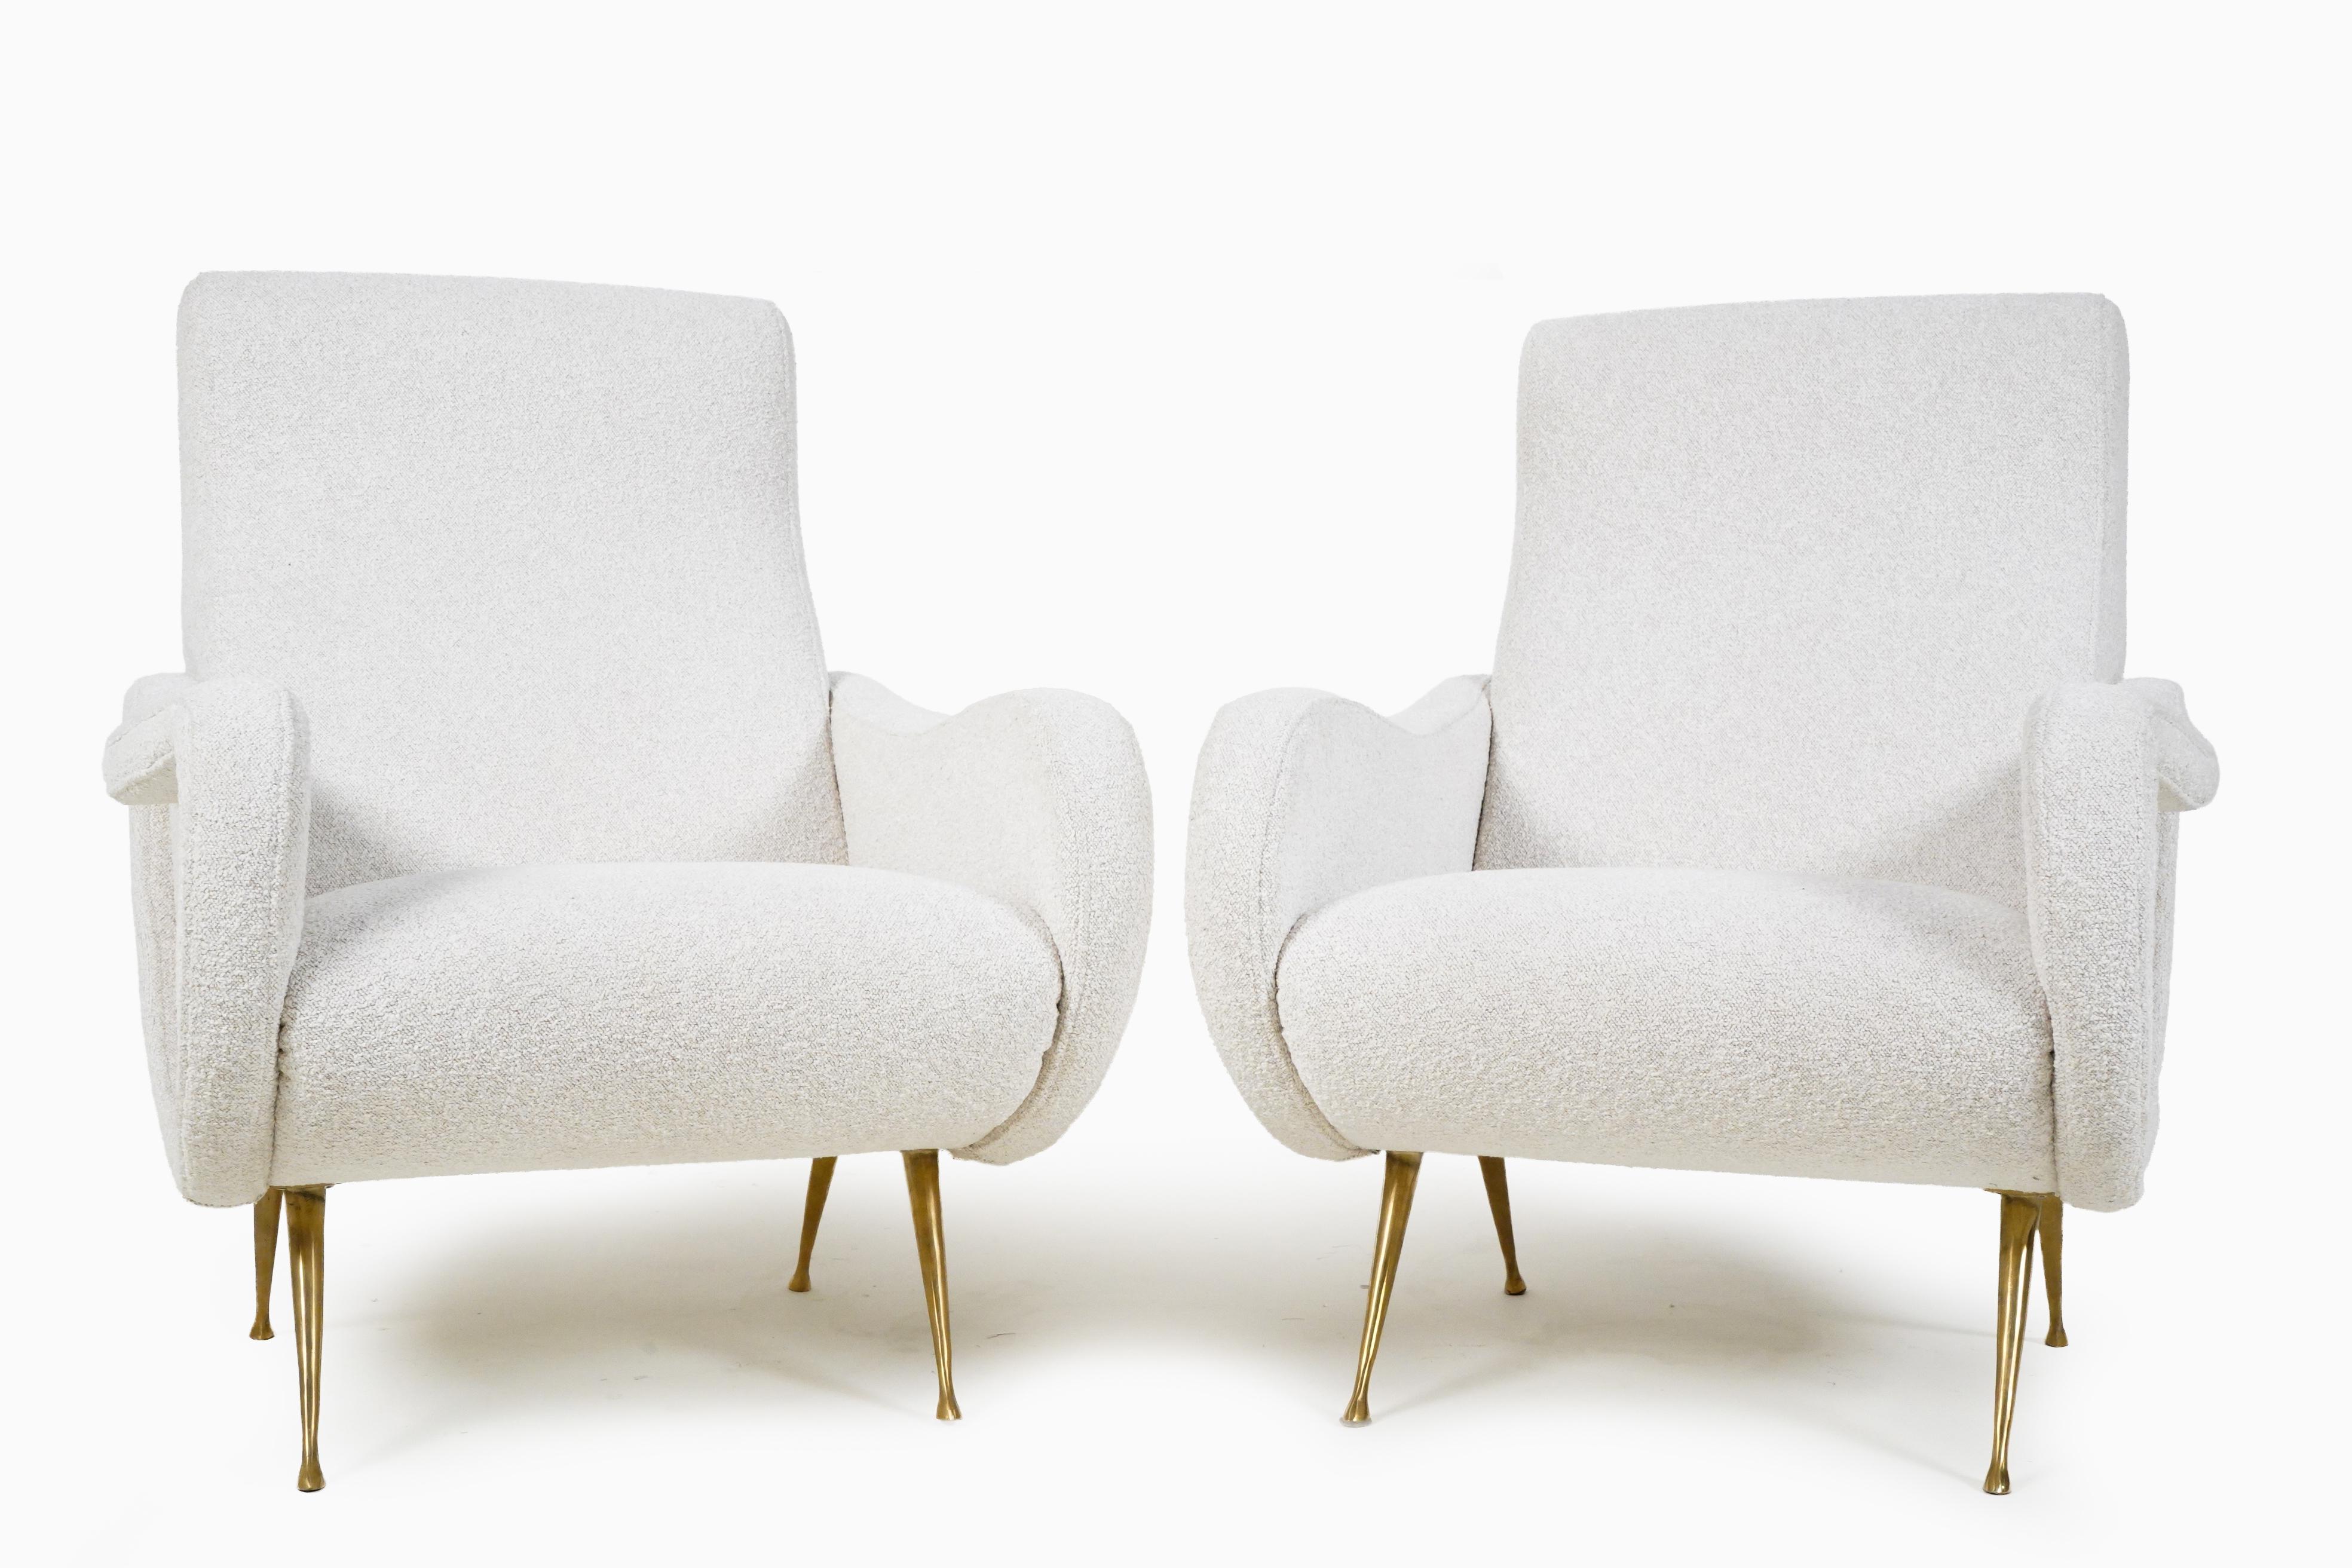 20th Century Pair of Vintage Midcentury Armchairs with Brass Legs and Bouclé Upholstery